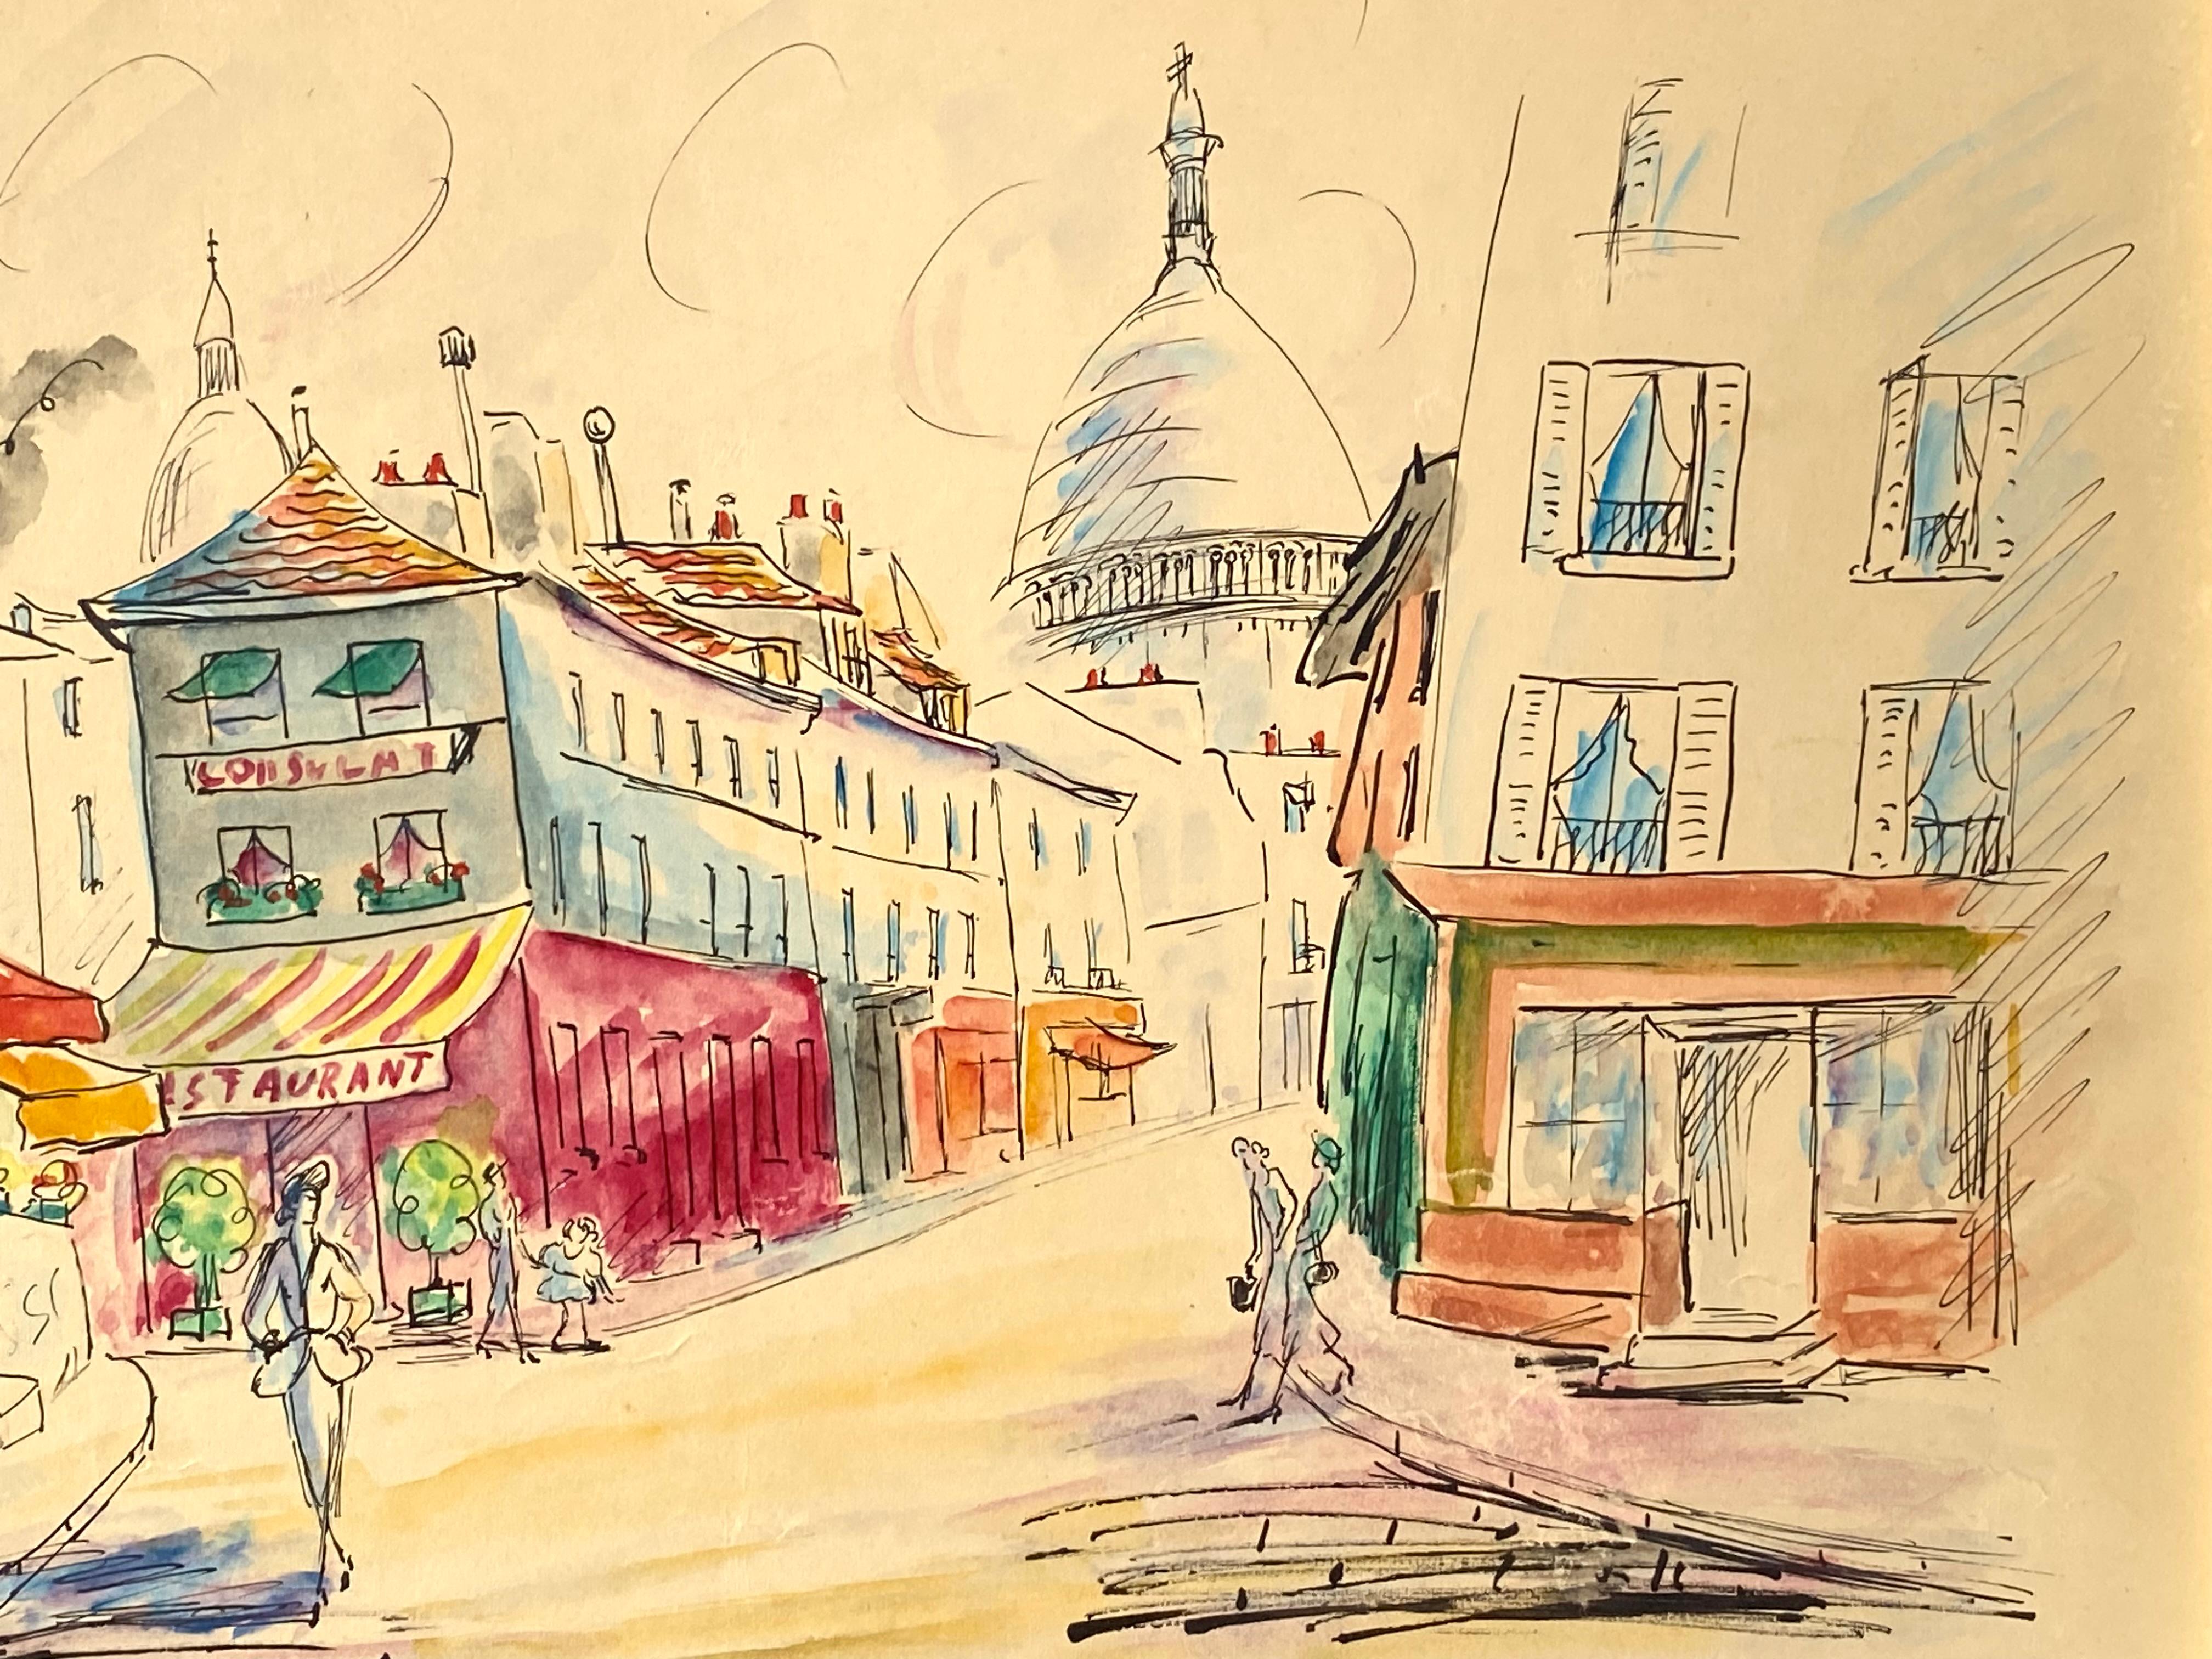 Original watercolor and ink drawing on paper mounted to heavy cardstock of the Place du Tertre in Montmartre, Paris by the French artist , Jeanne Felicia Simon.  Signed lower right in ink and titled lower left.  Condition is good. Circa 1965. Under